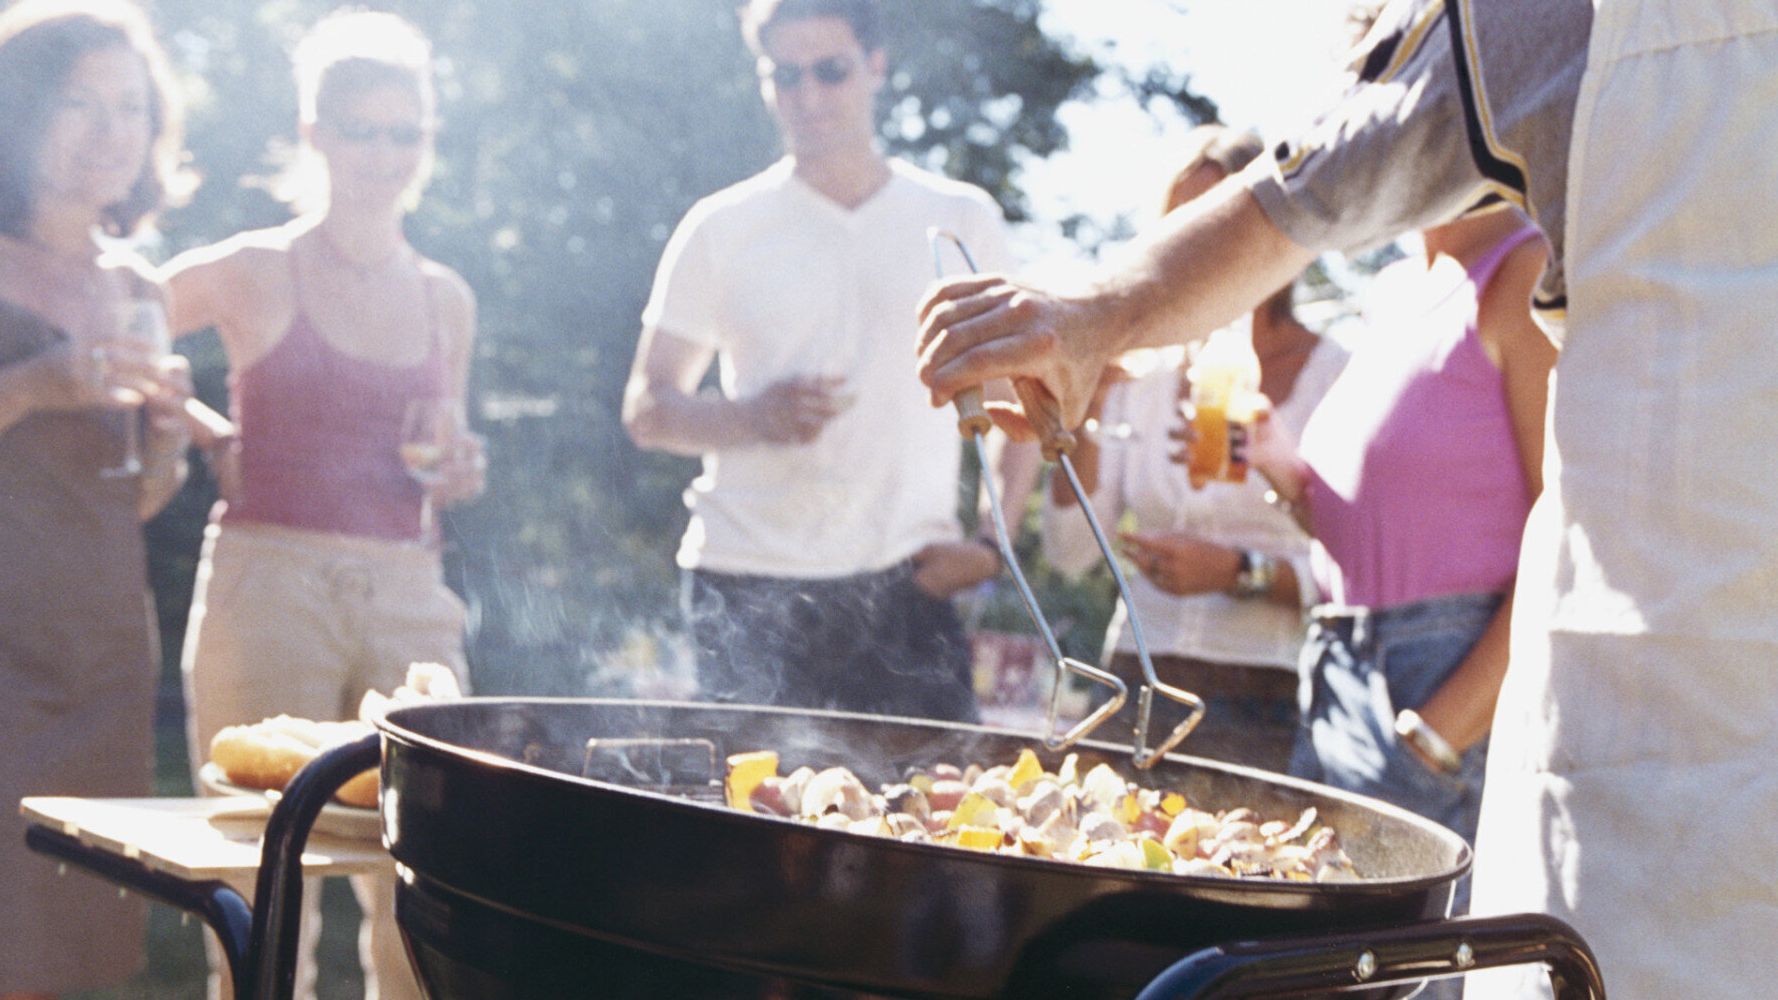 Almost All Brits 94 Are Risking Their Health With Poor Bbq Habits